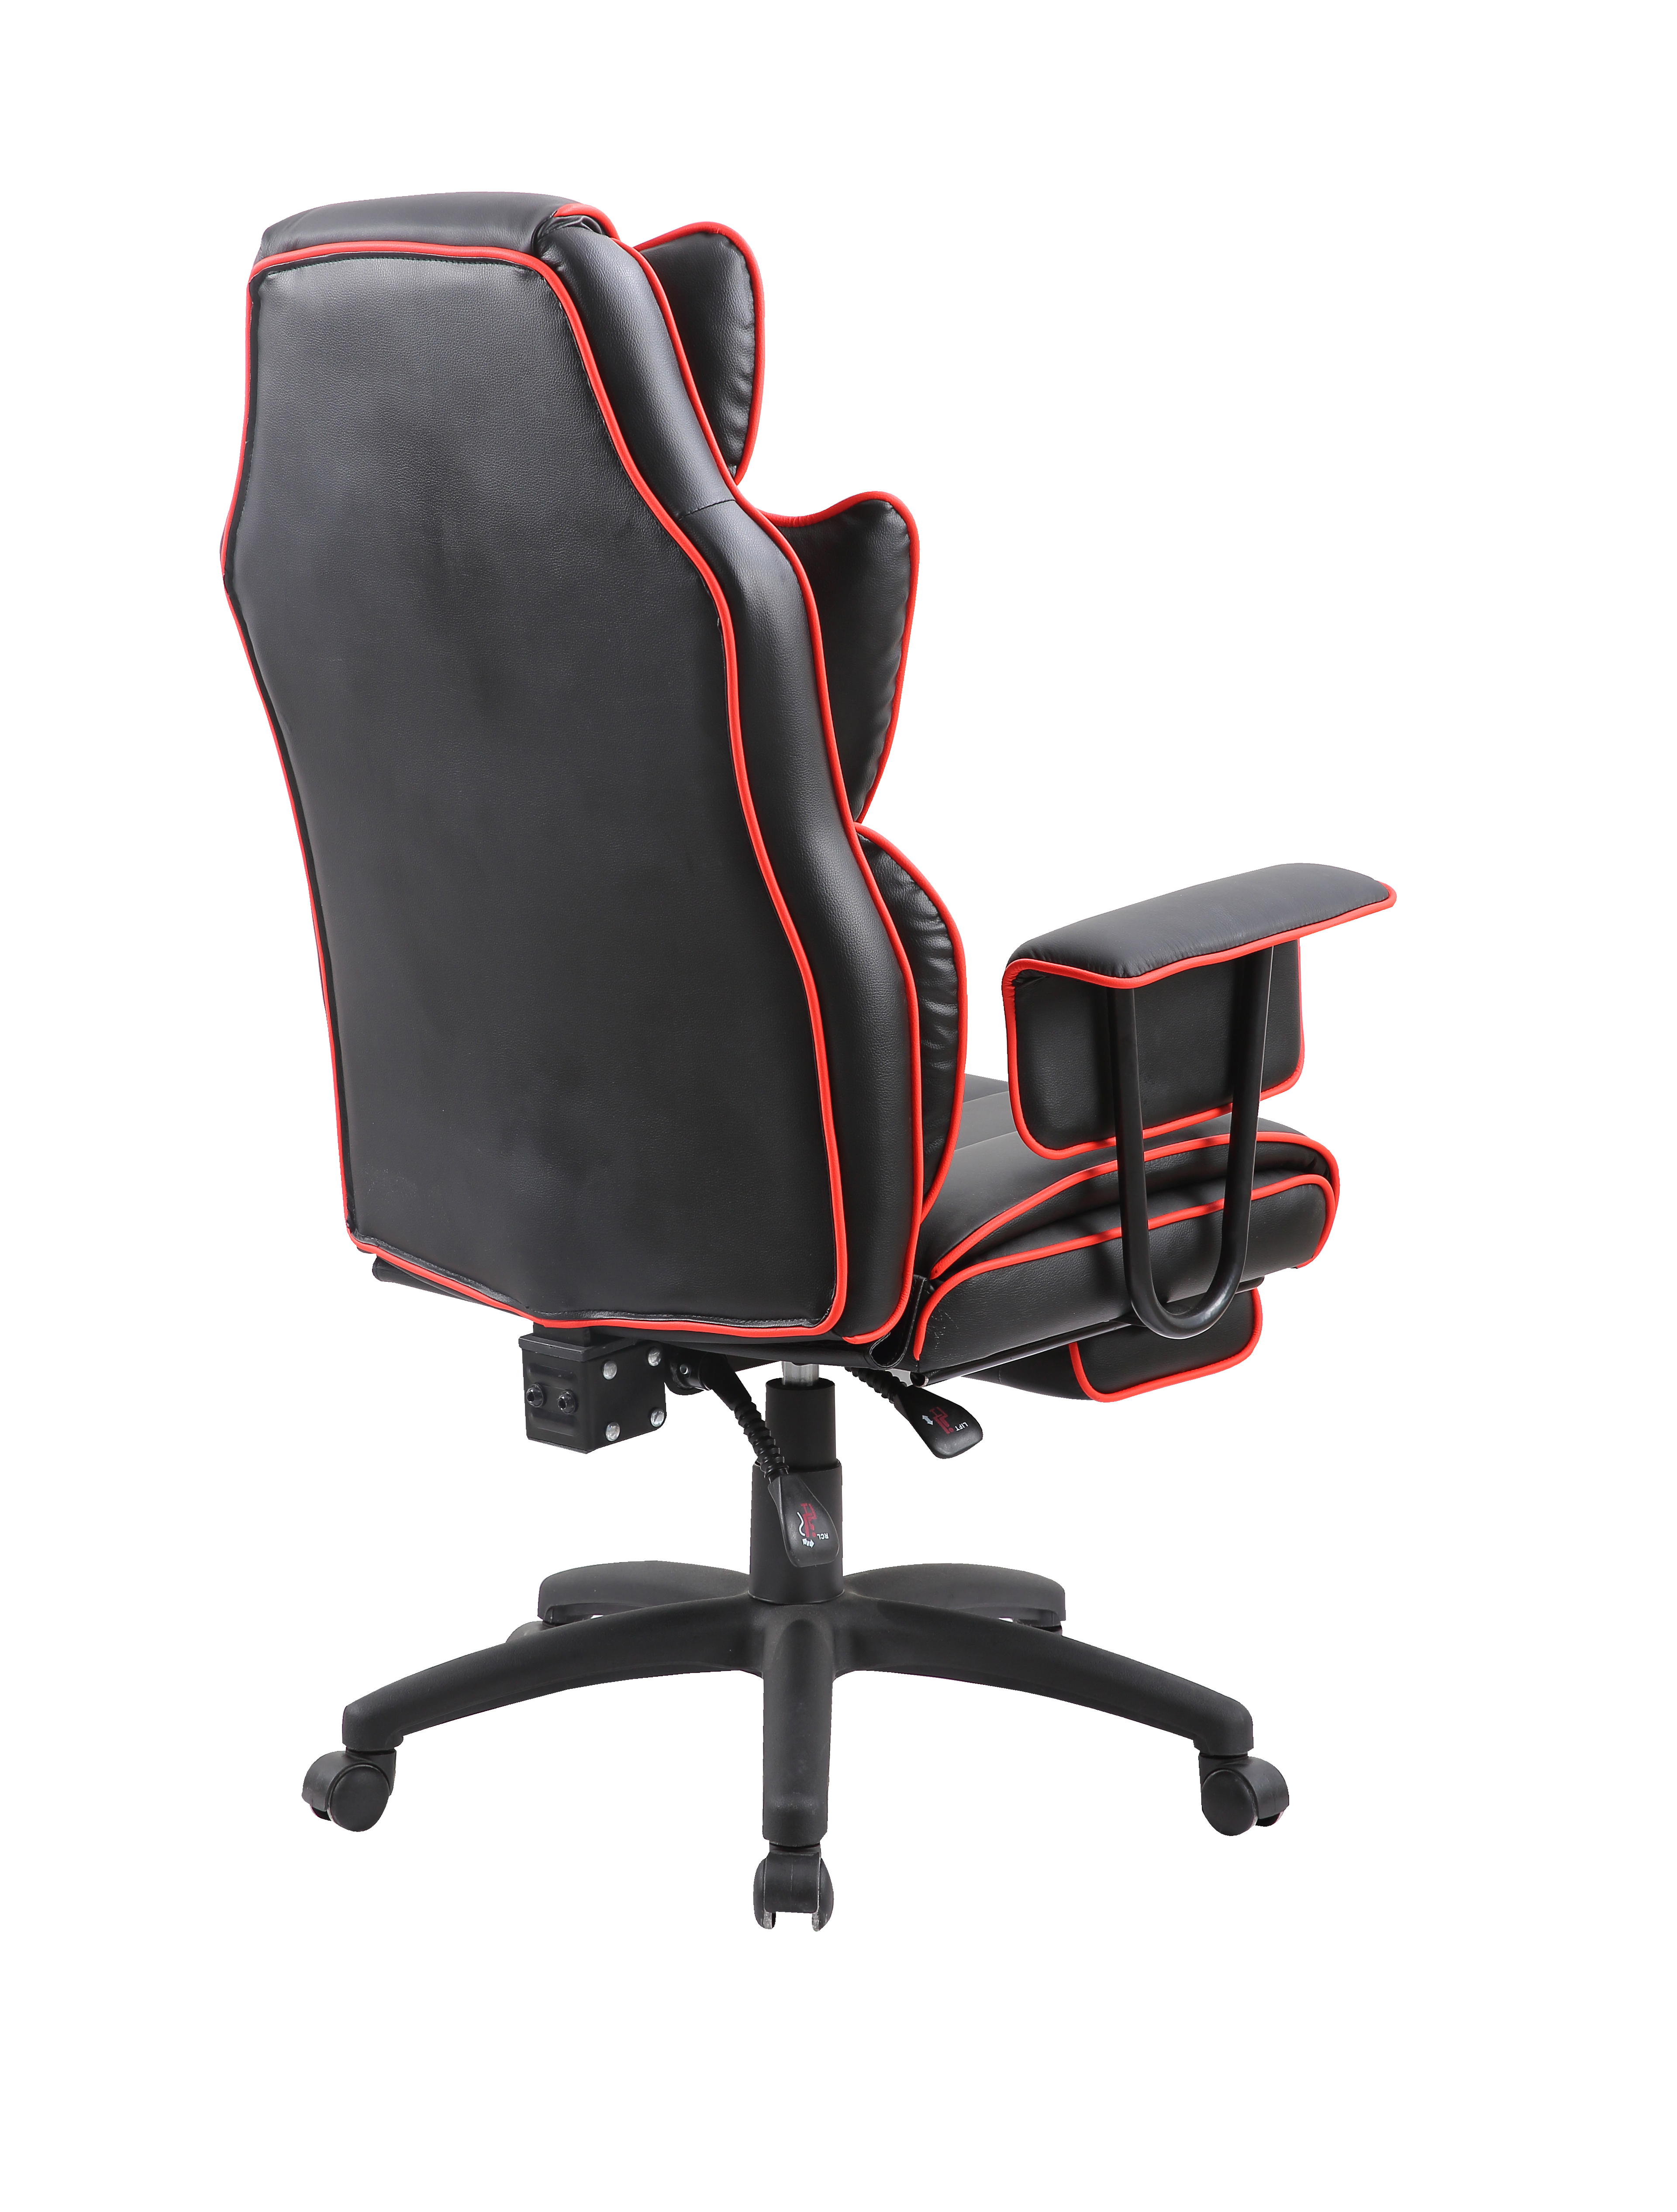 SHINERUN High Quality Office Chair PU Leather Computer Chair Executive Office Chair with Leg Rest